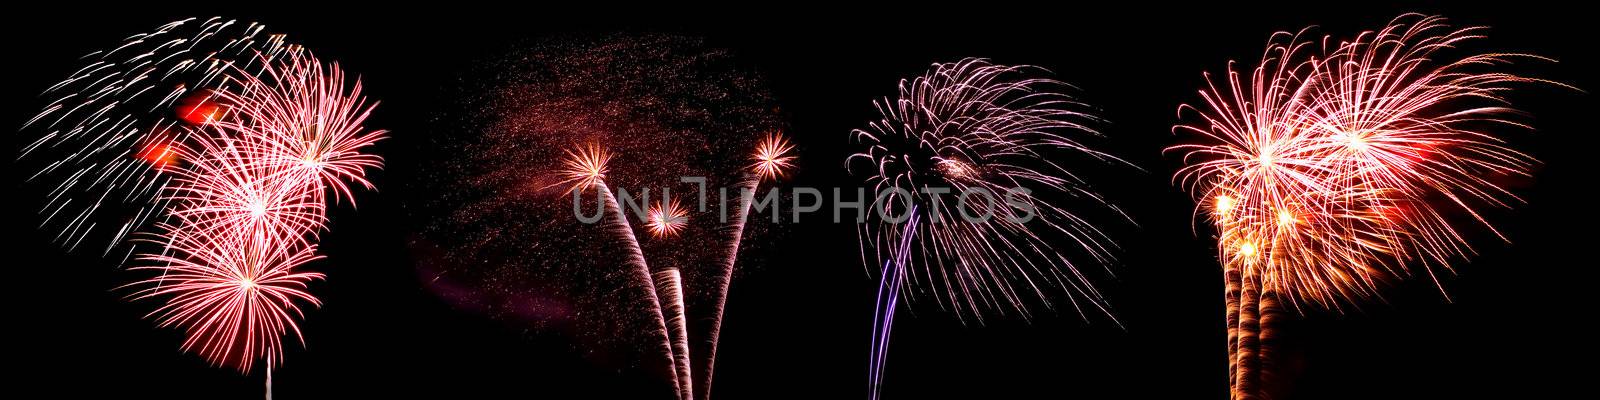 Collection of Multicolored Fireworks with Rocket Trails Against a Black Sky